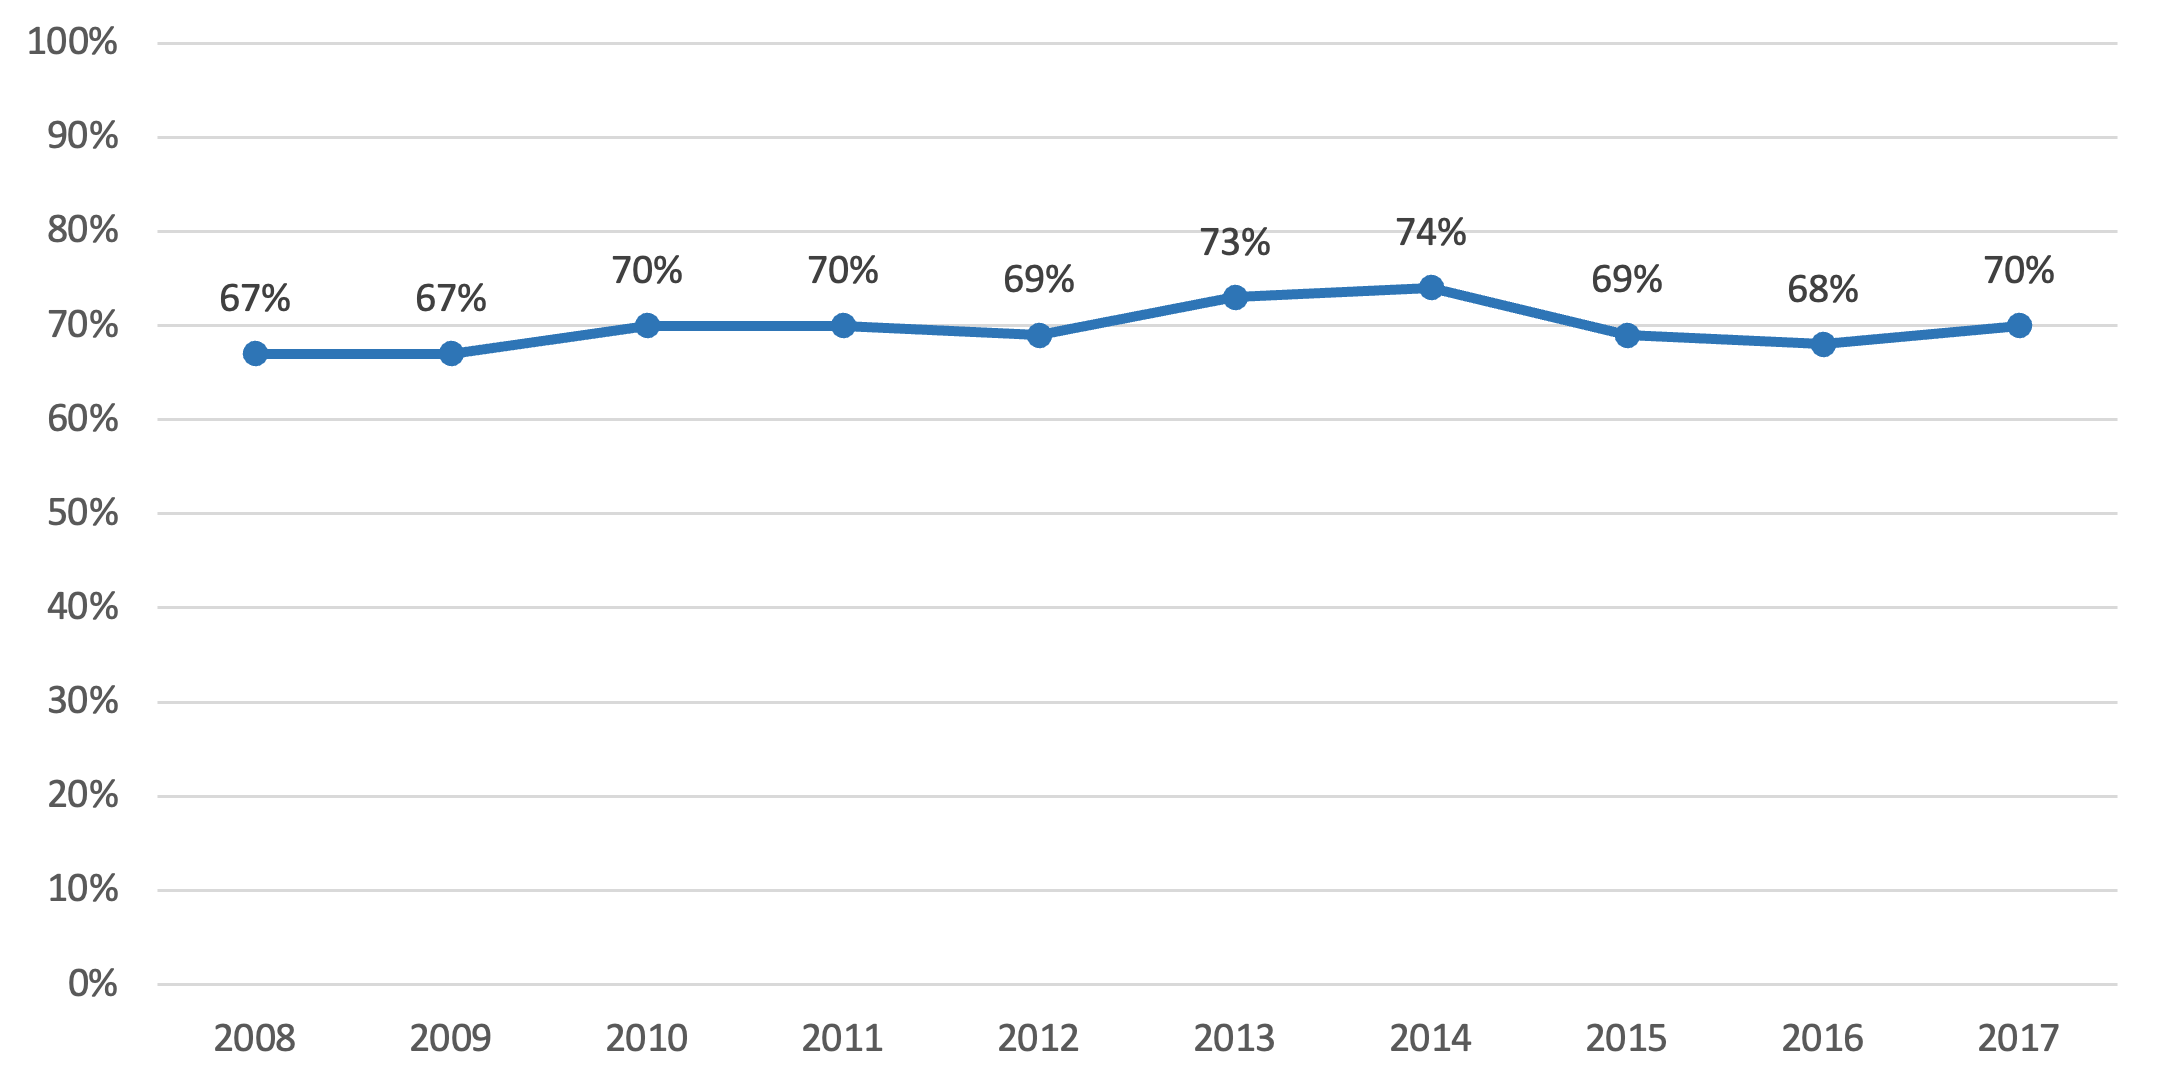 A chart showing graduation rate over time, data is in the table that follows